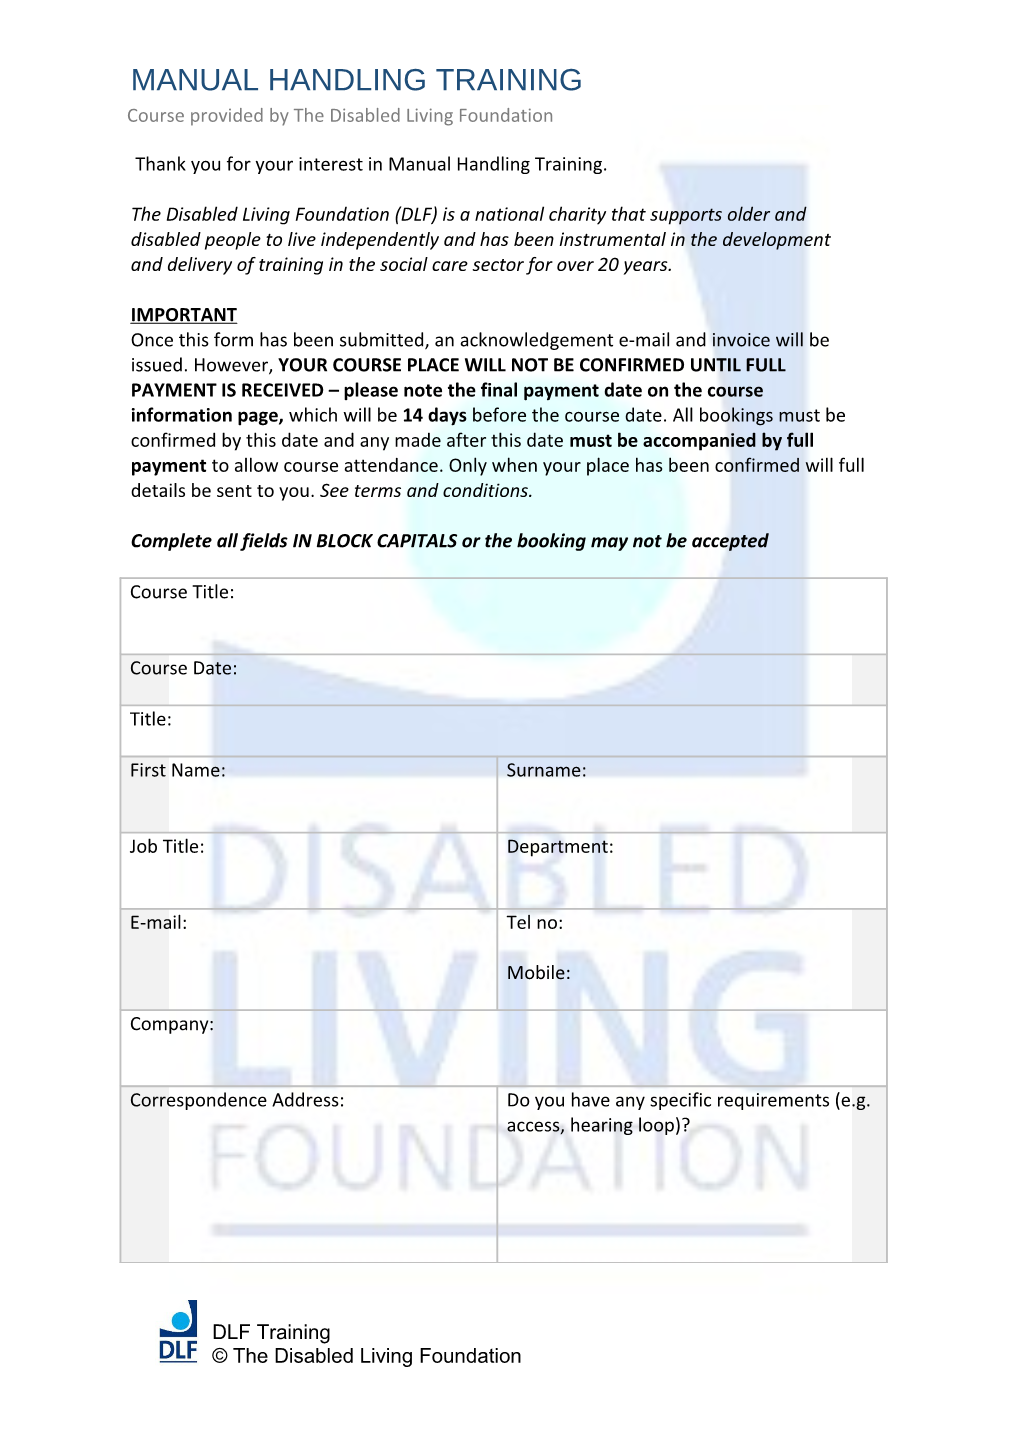 Course Provided by the Disabled Living Foundation